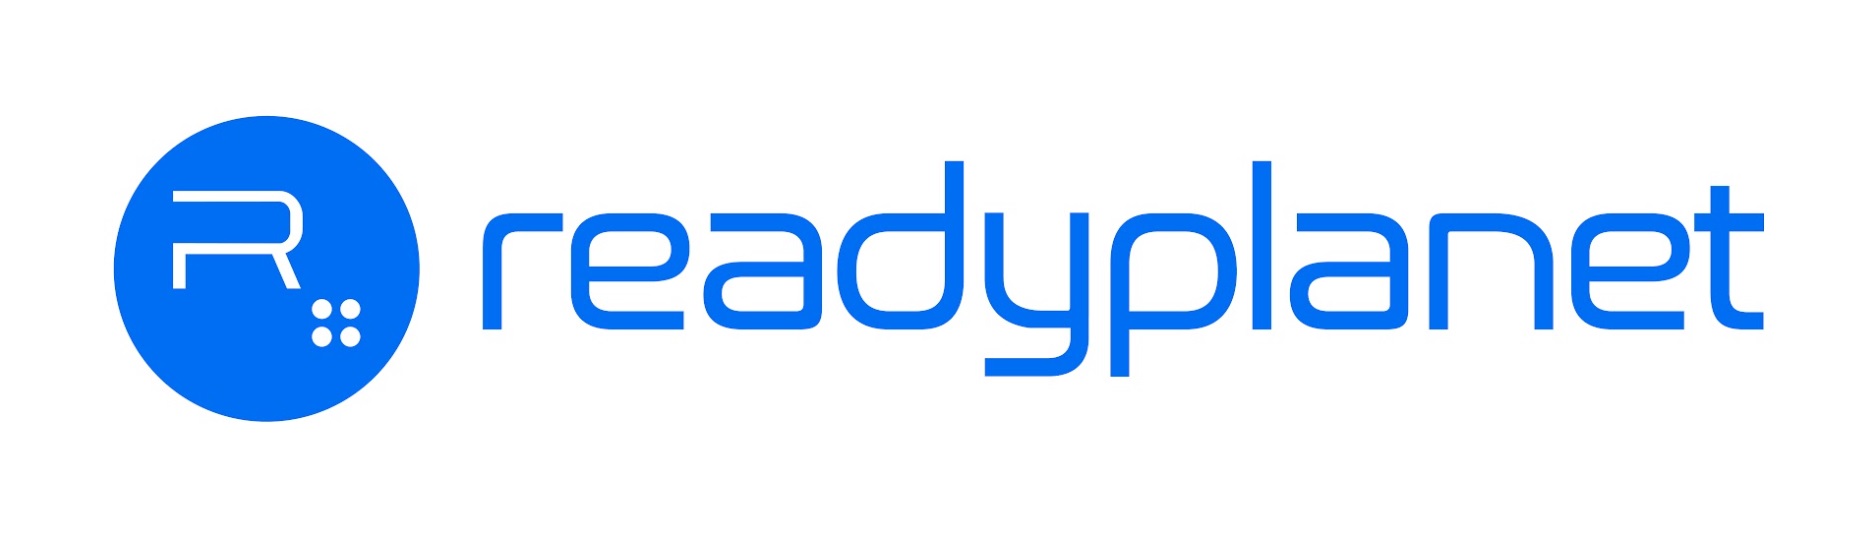 Readyplanet Public Company Limited